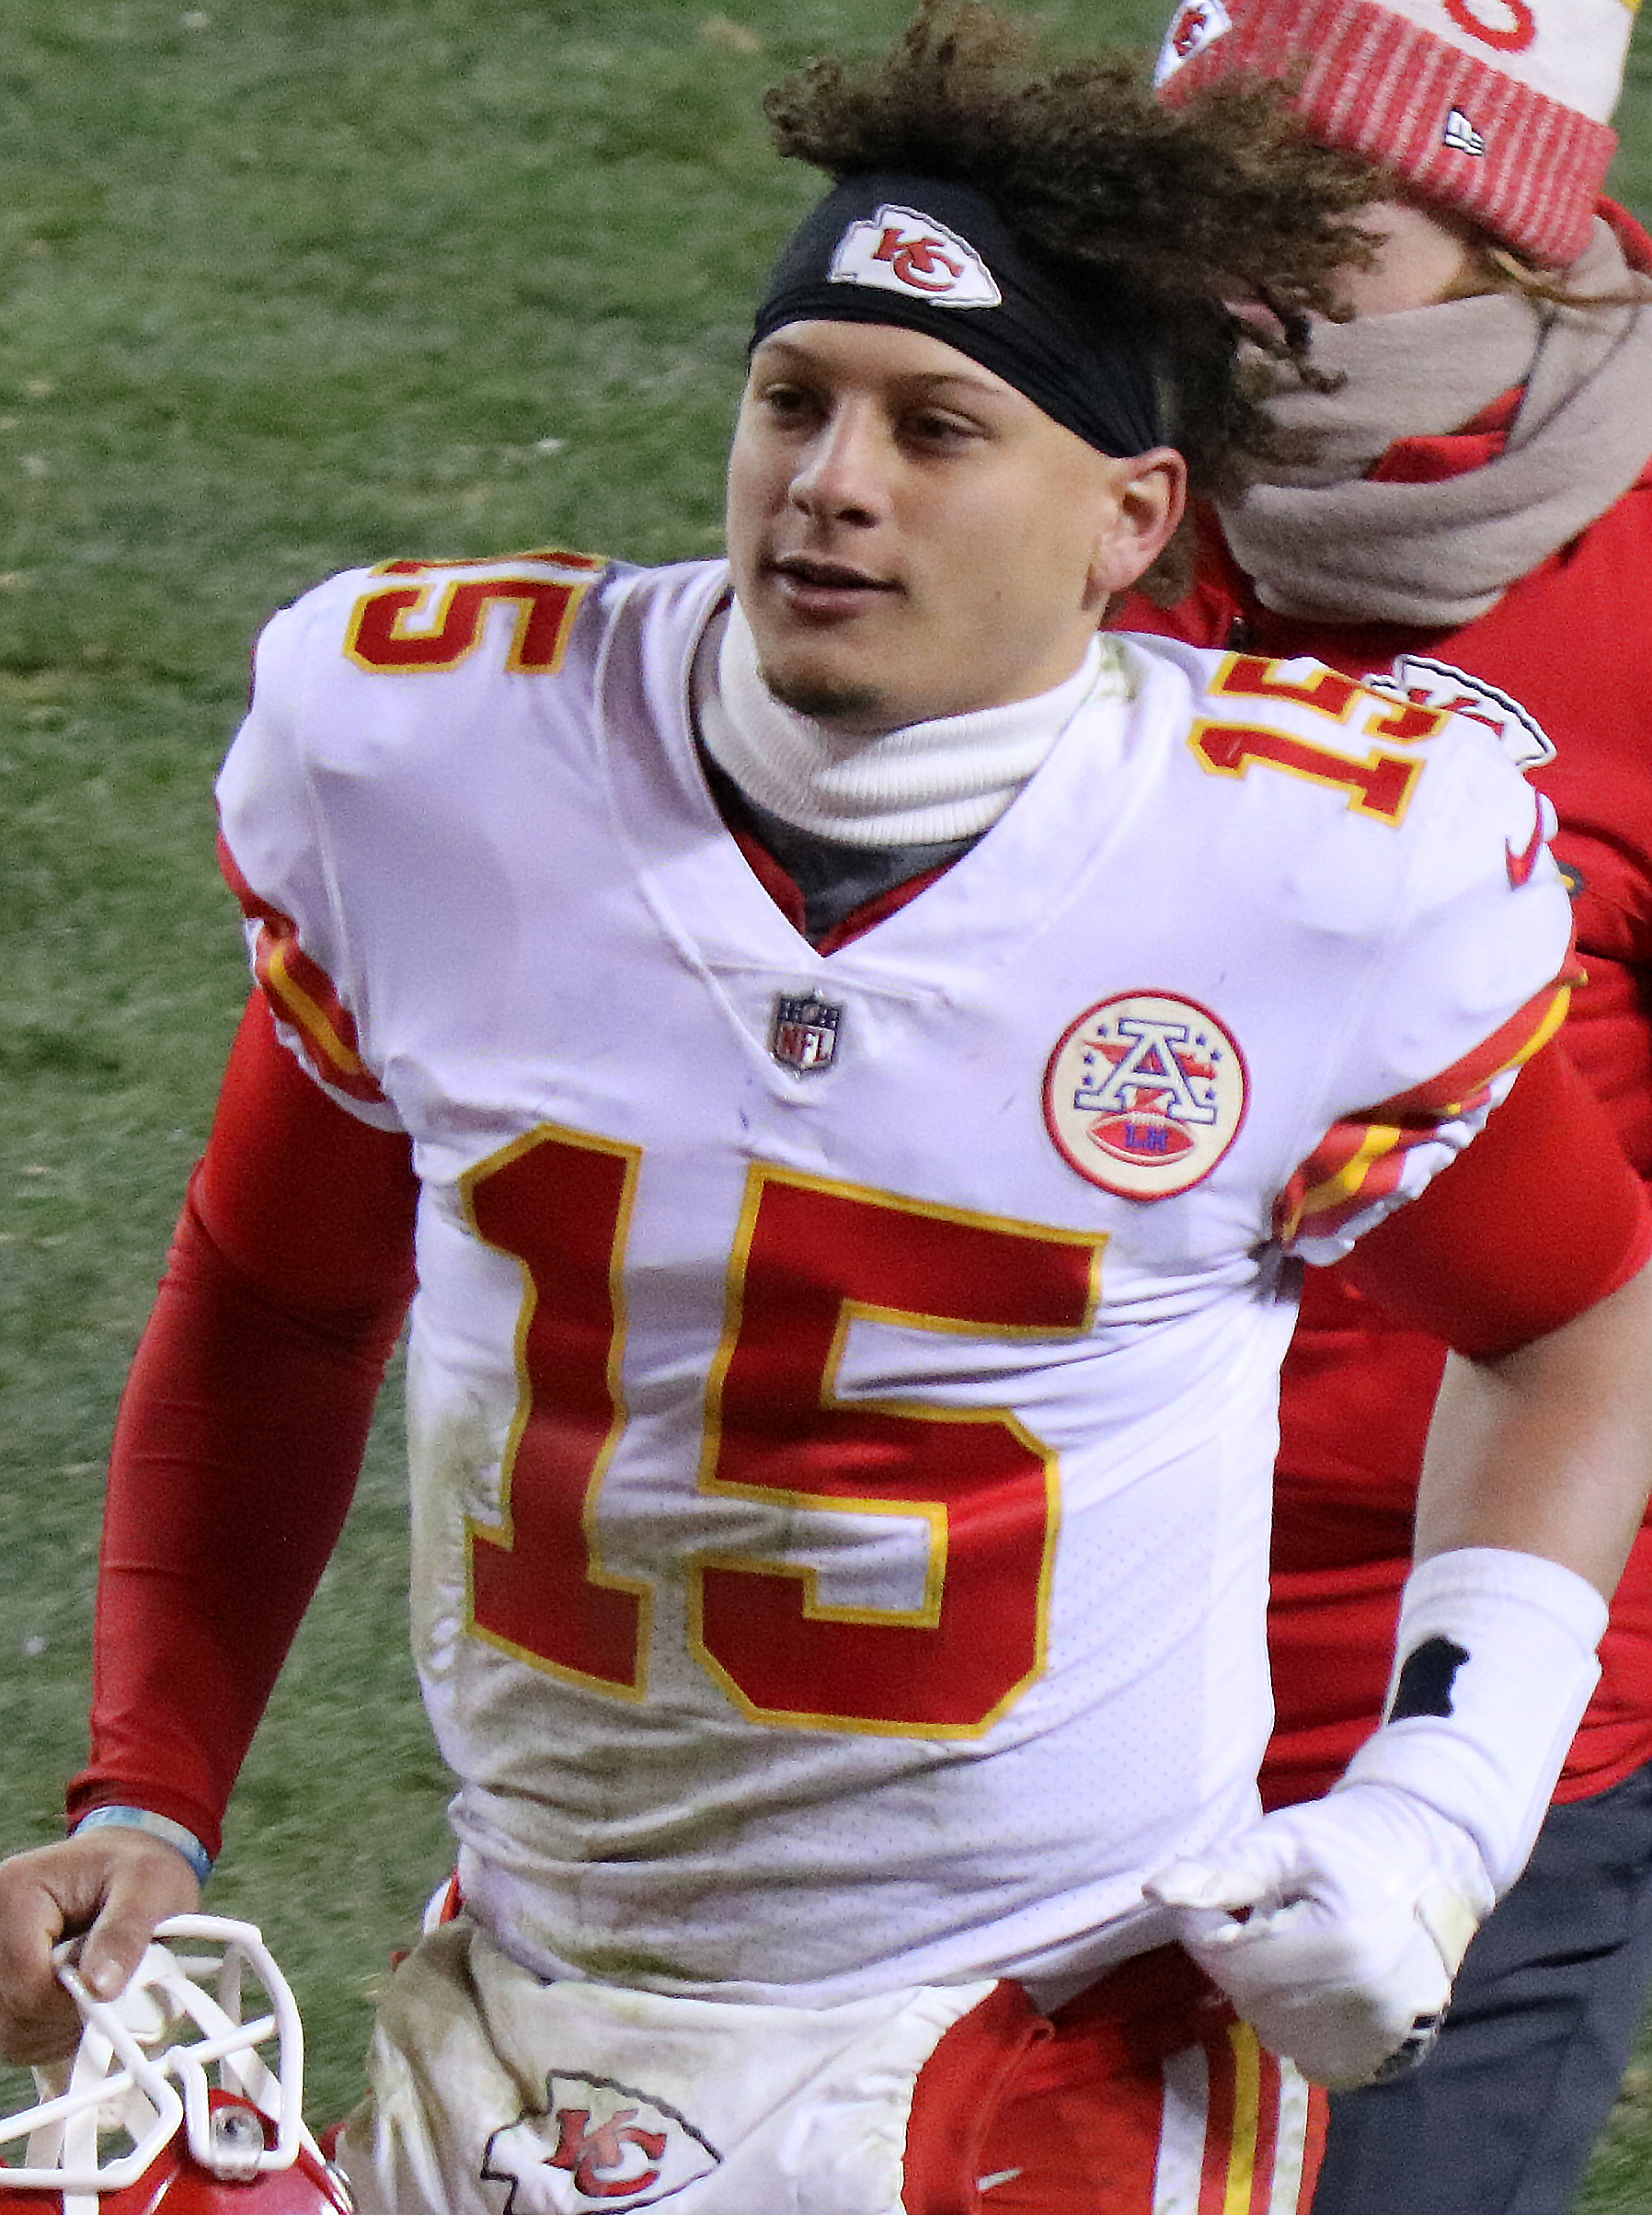 Patrick Mahomes signs a 10 year extension contract worth $503 million